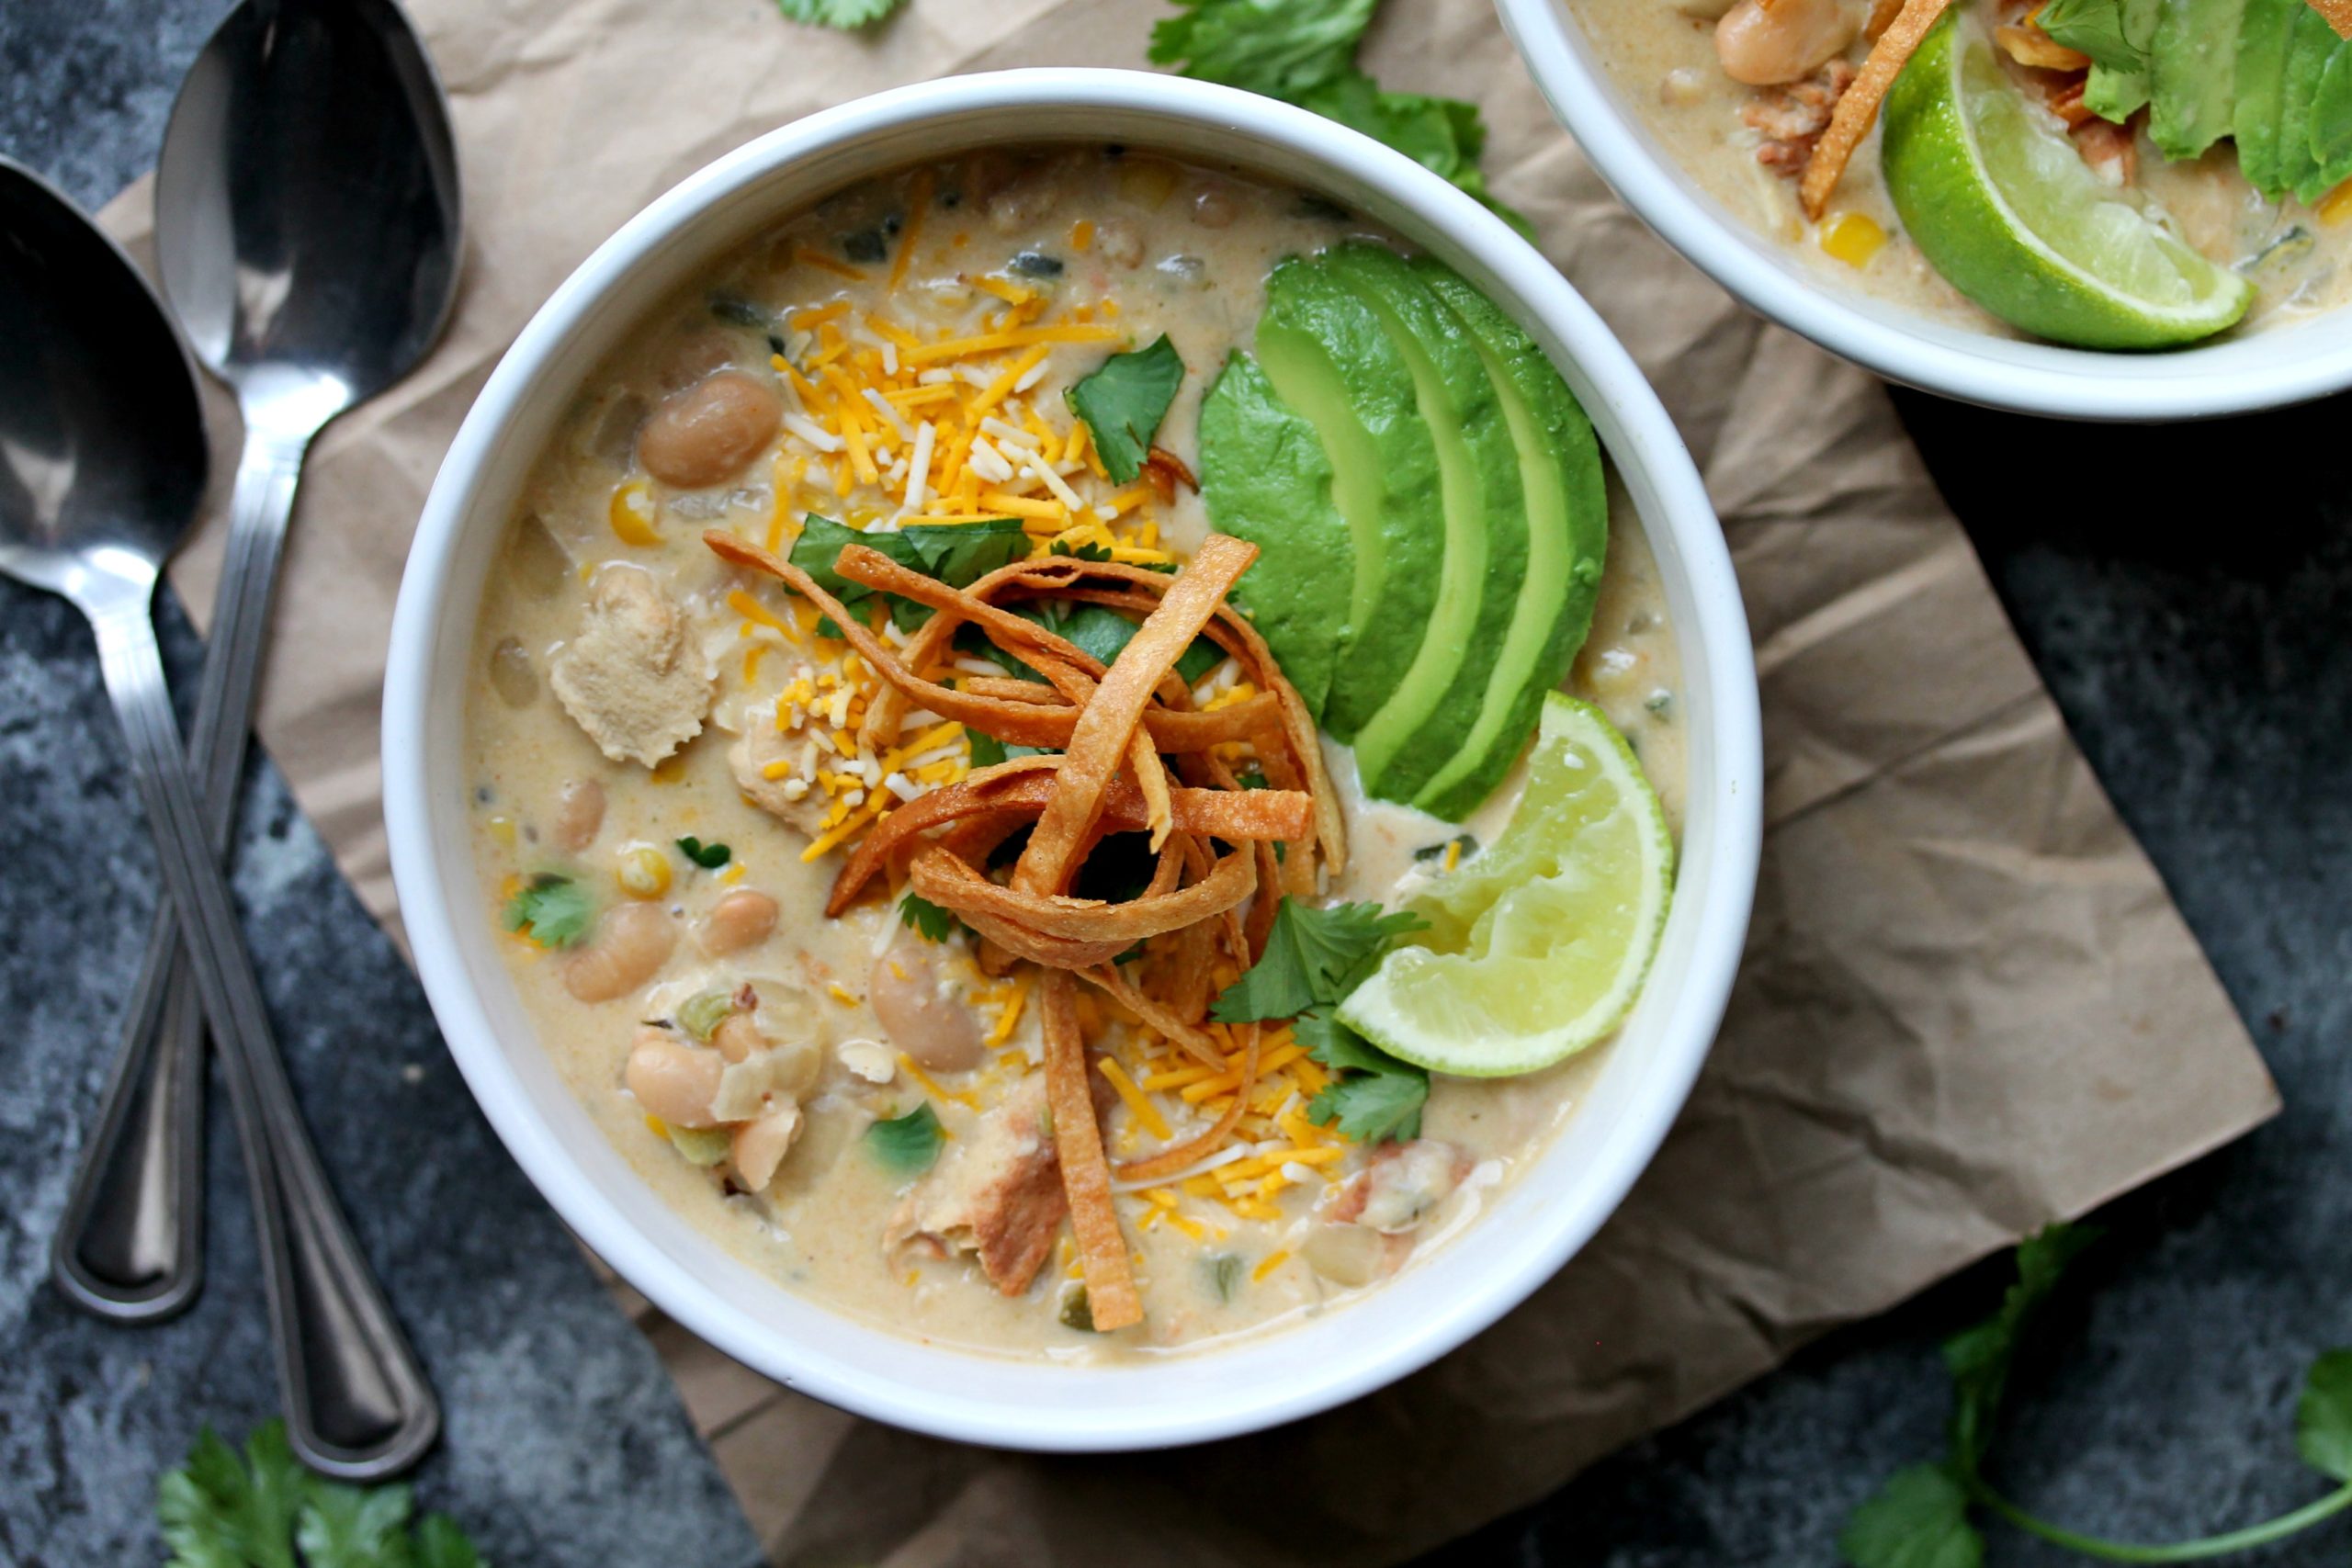 CrockPot White Chicken Chili - Easy, Flavorful and Healthy